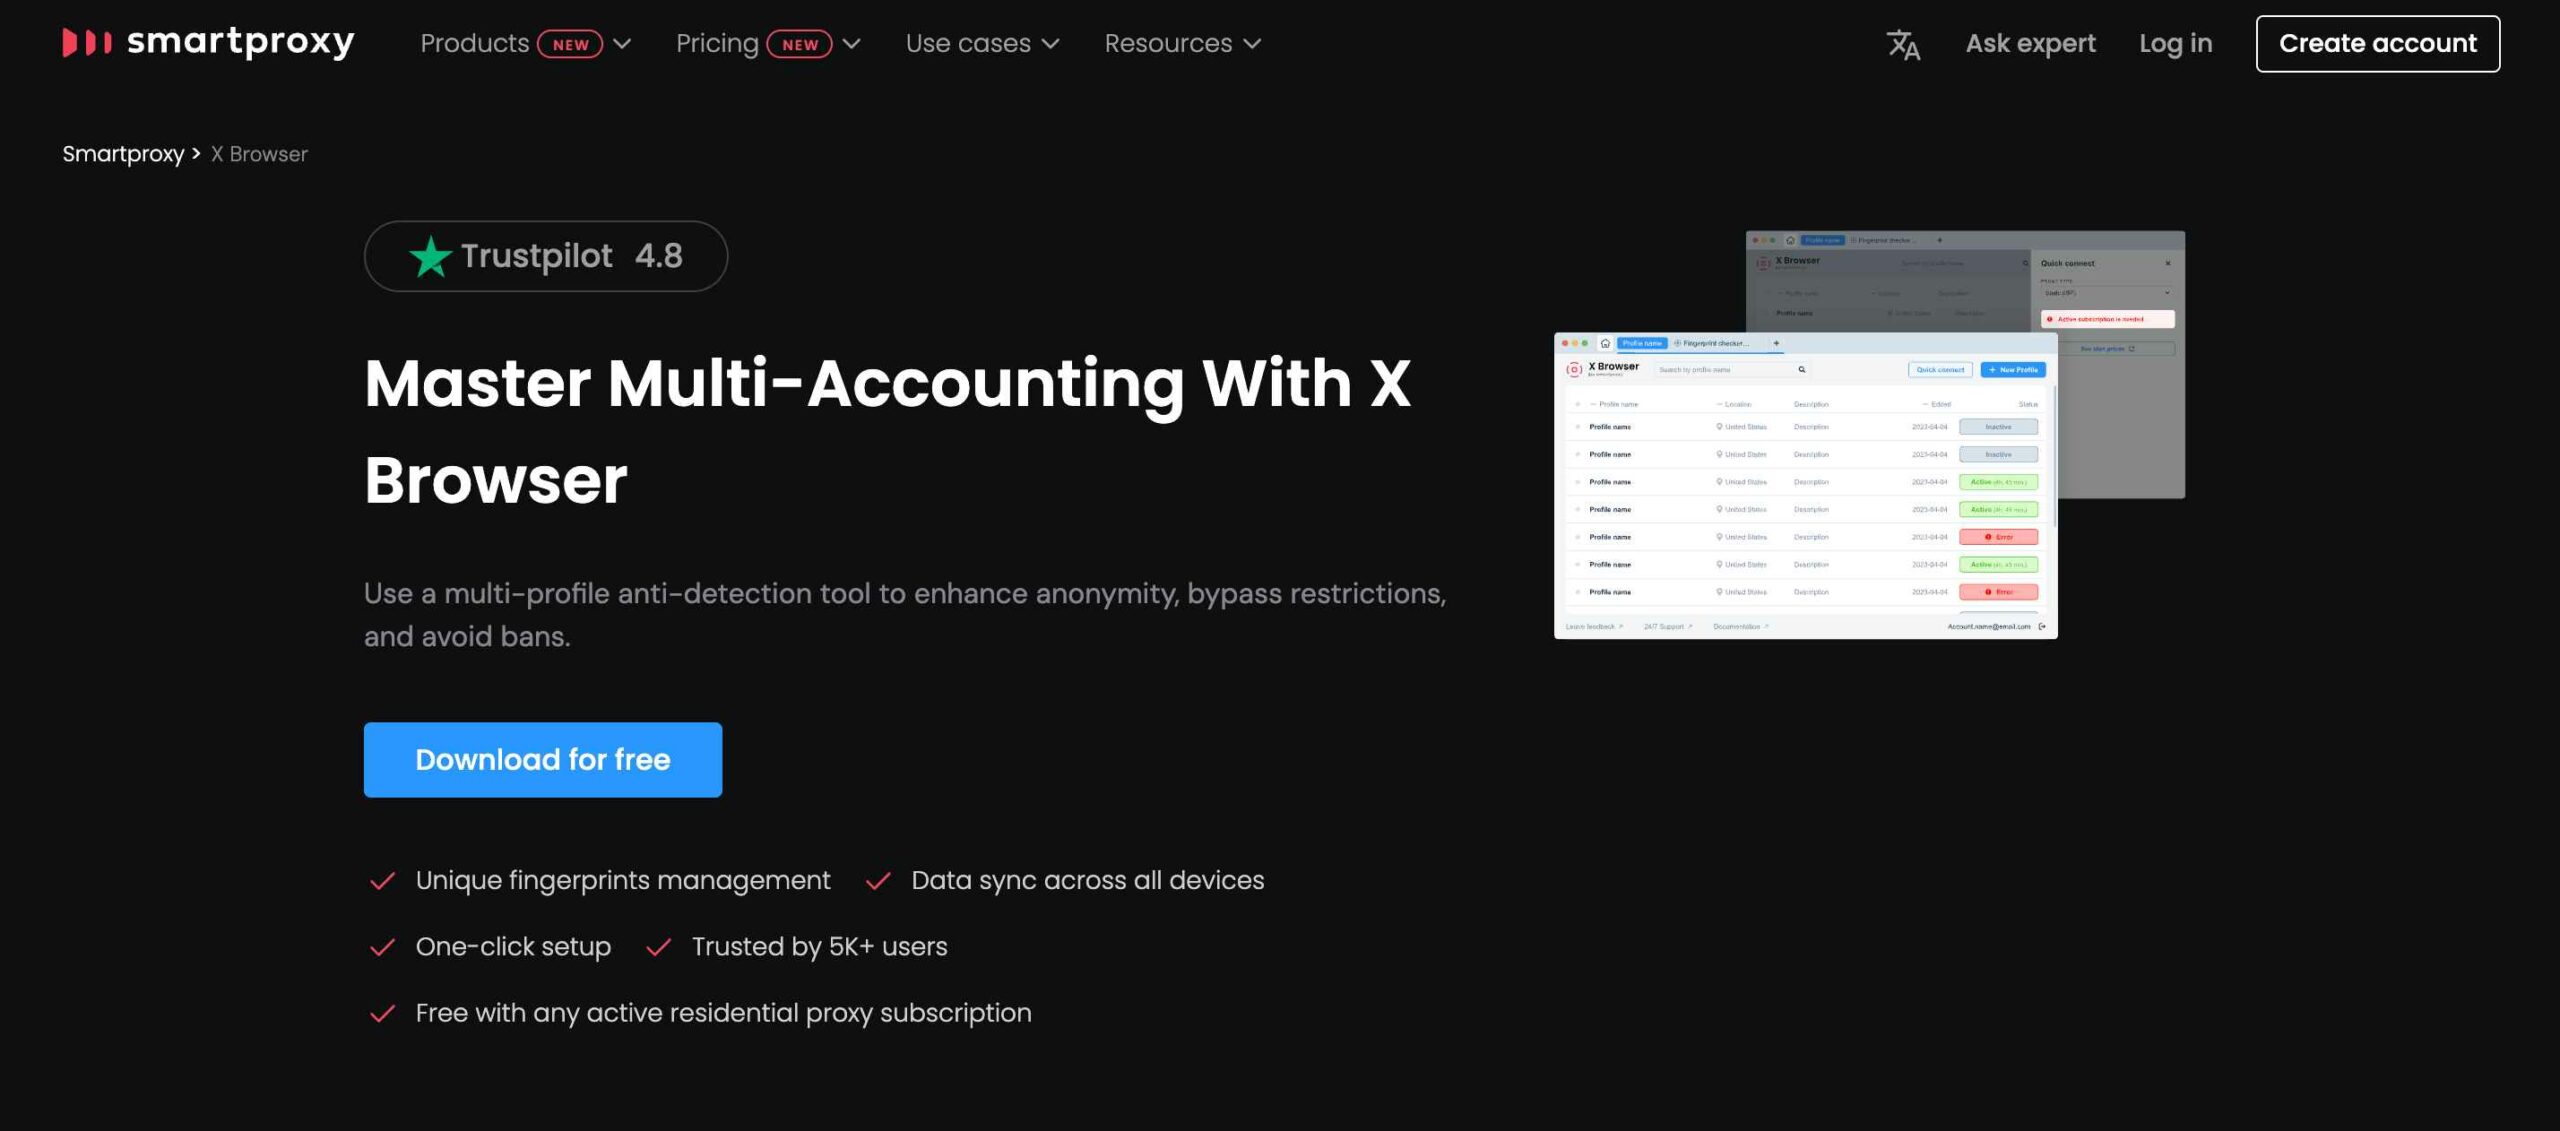 Master Multi-Accounting With X Browser